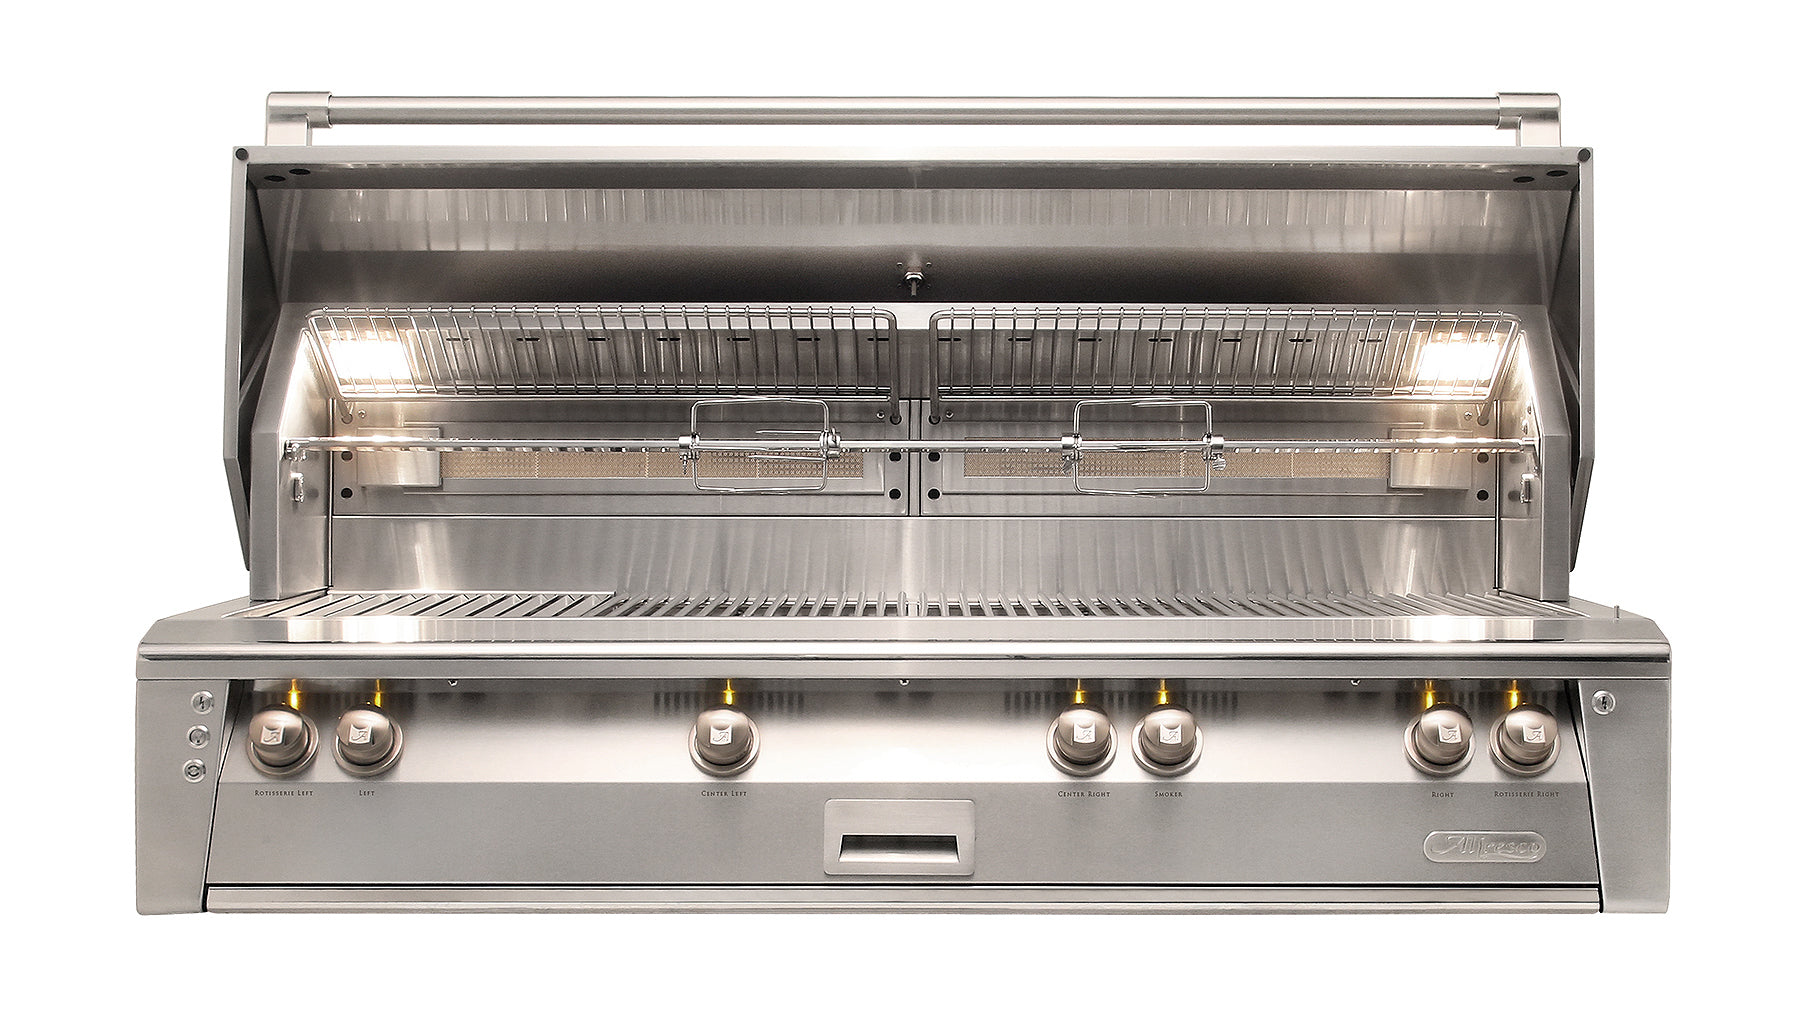 Alfresco - 3 Burner Natural Gas BBQ in Stainless - ALXE-56BFGC